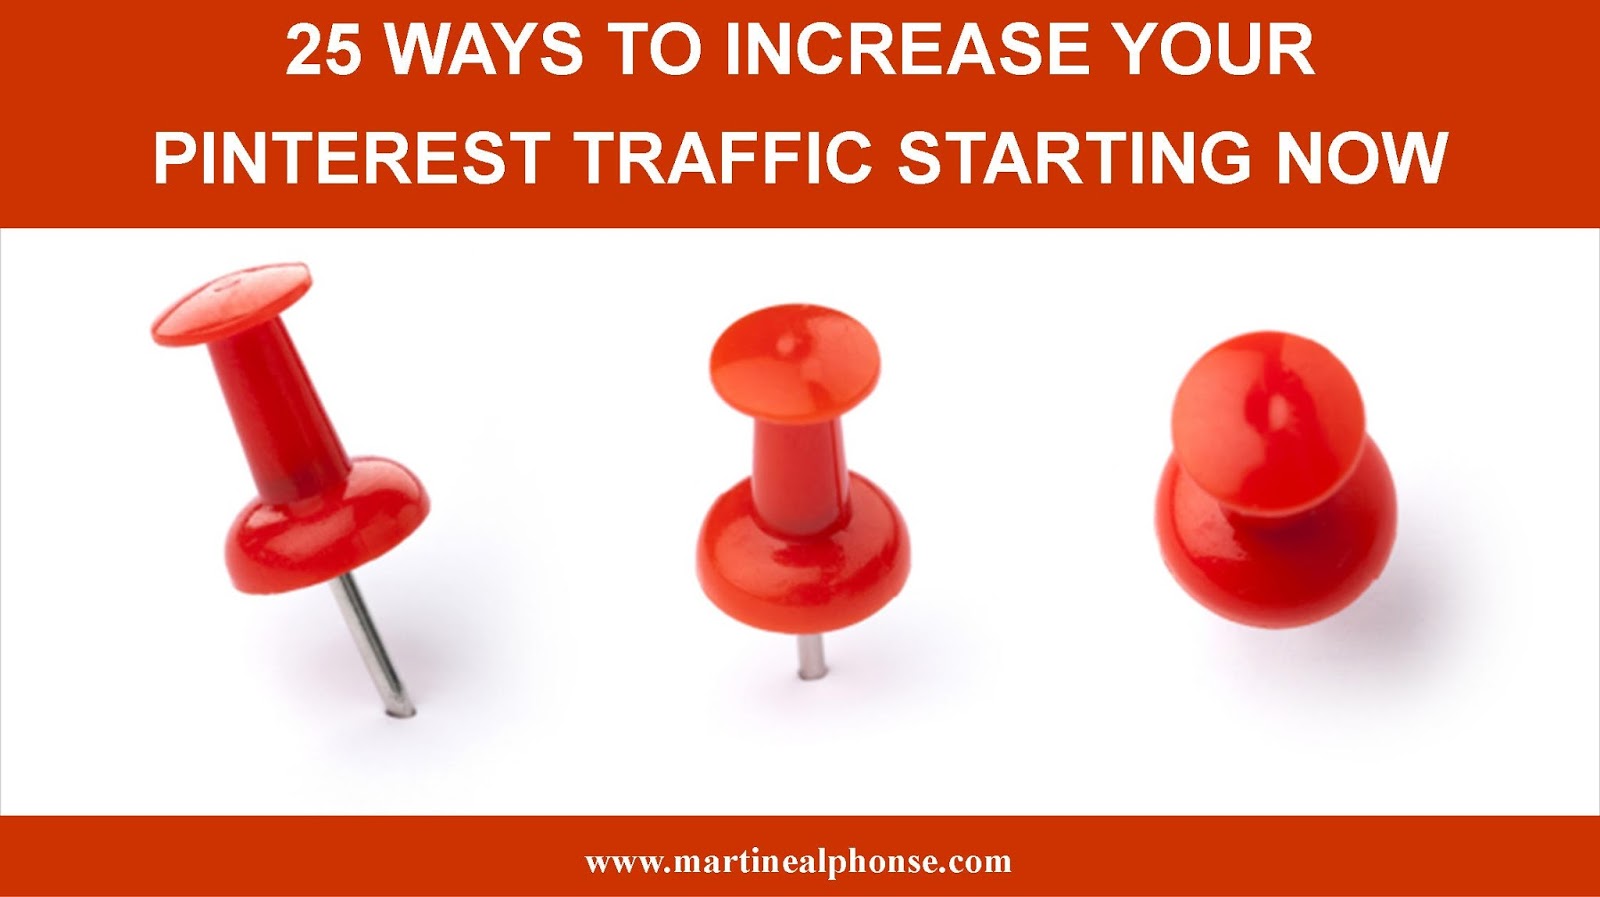 It’s about finding what works and doing it ritualistically. Here are some of my top ways to increase your Pinterest traffic starting right now.